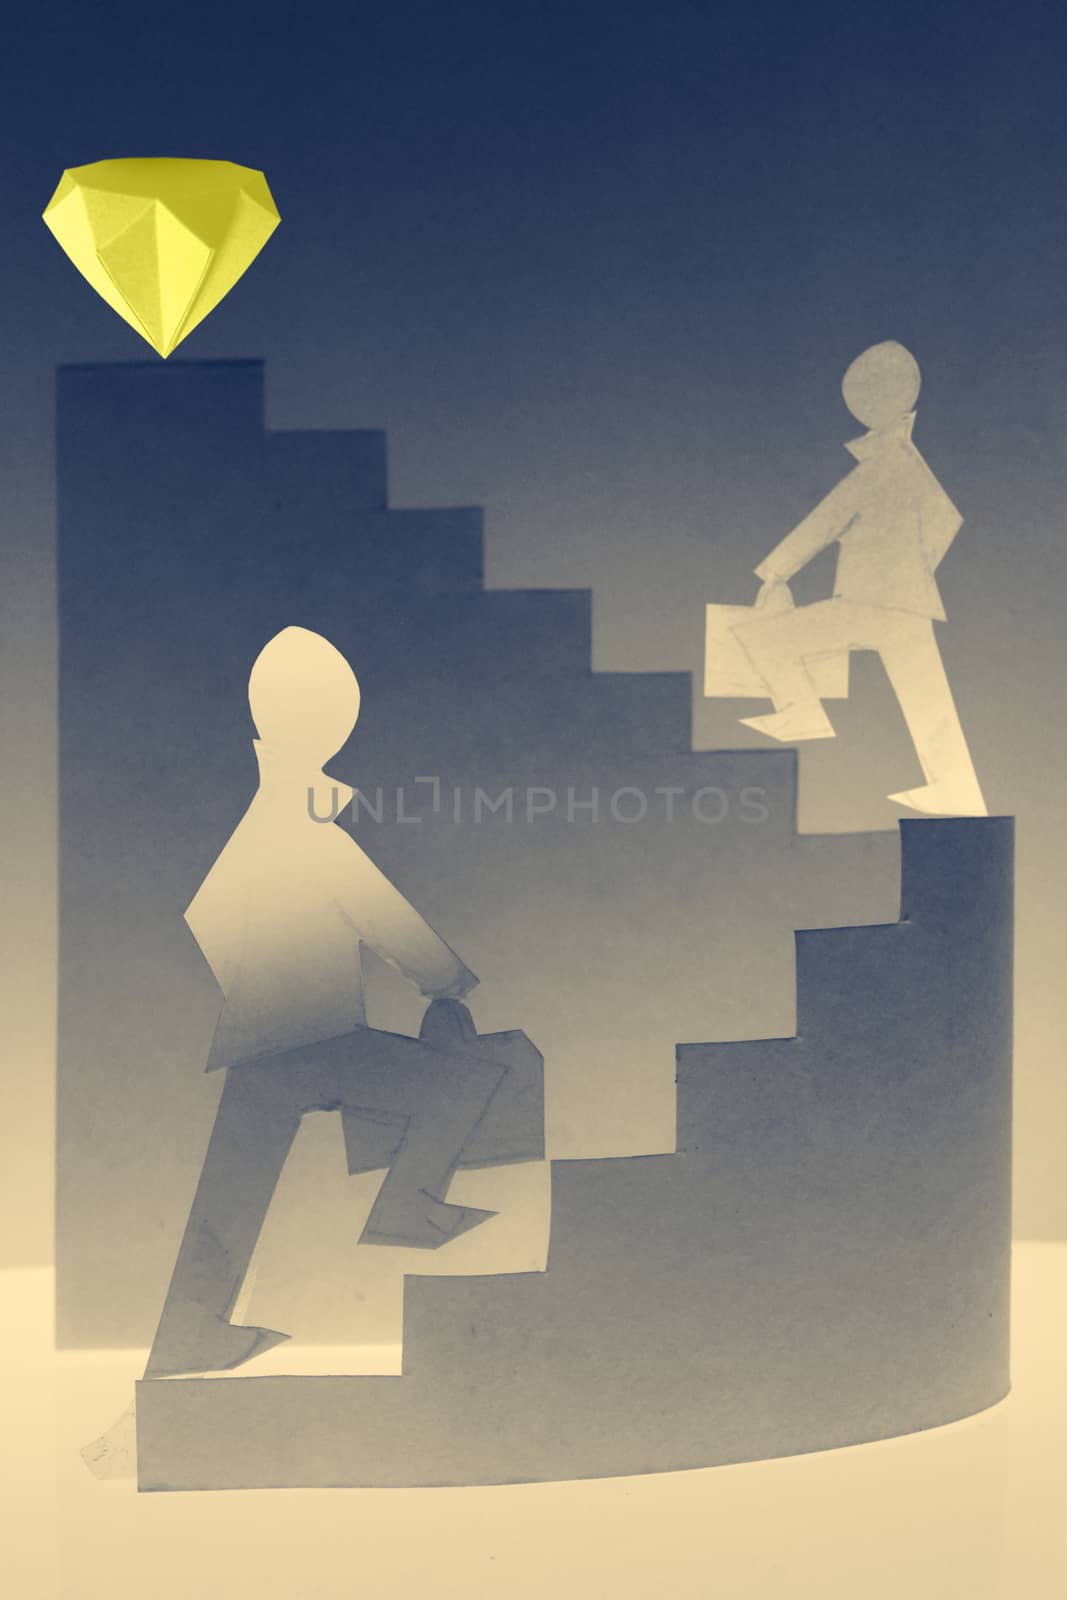 Businessman stepping up a staircase, achieve diamond